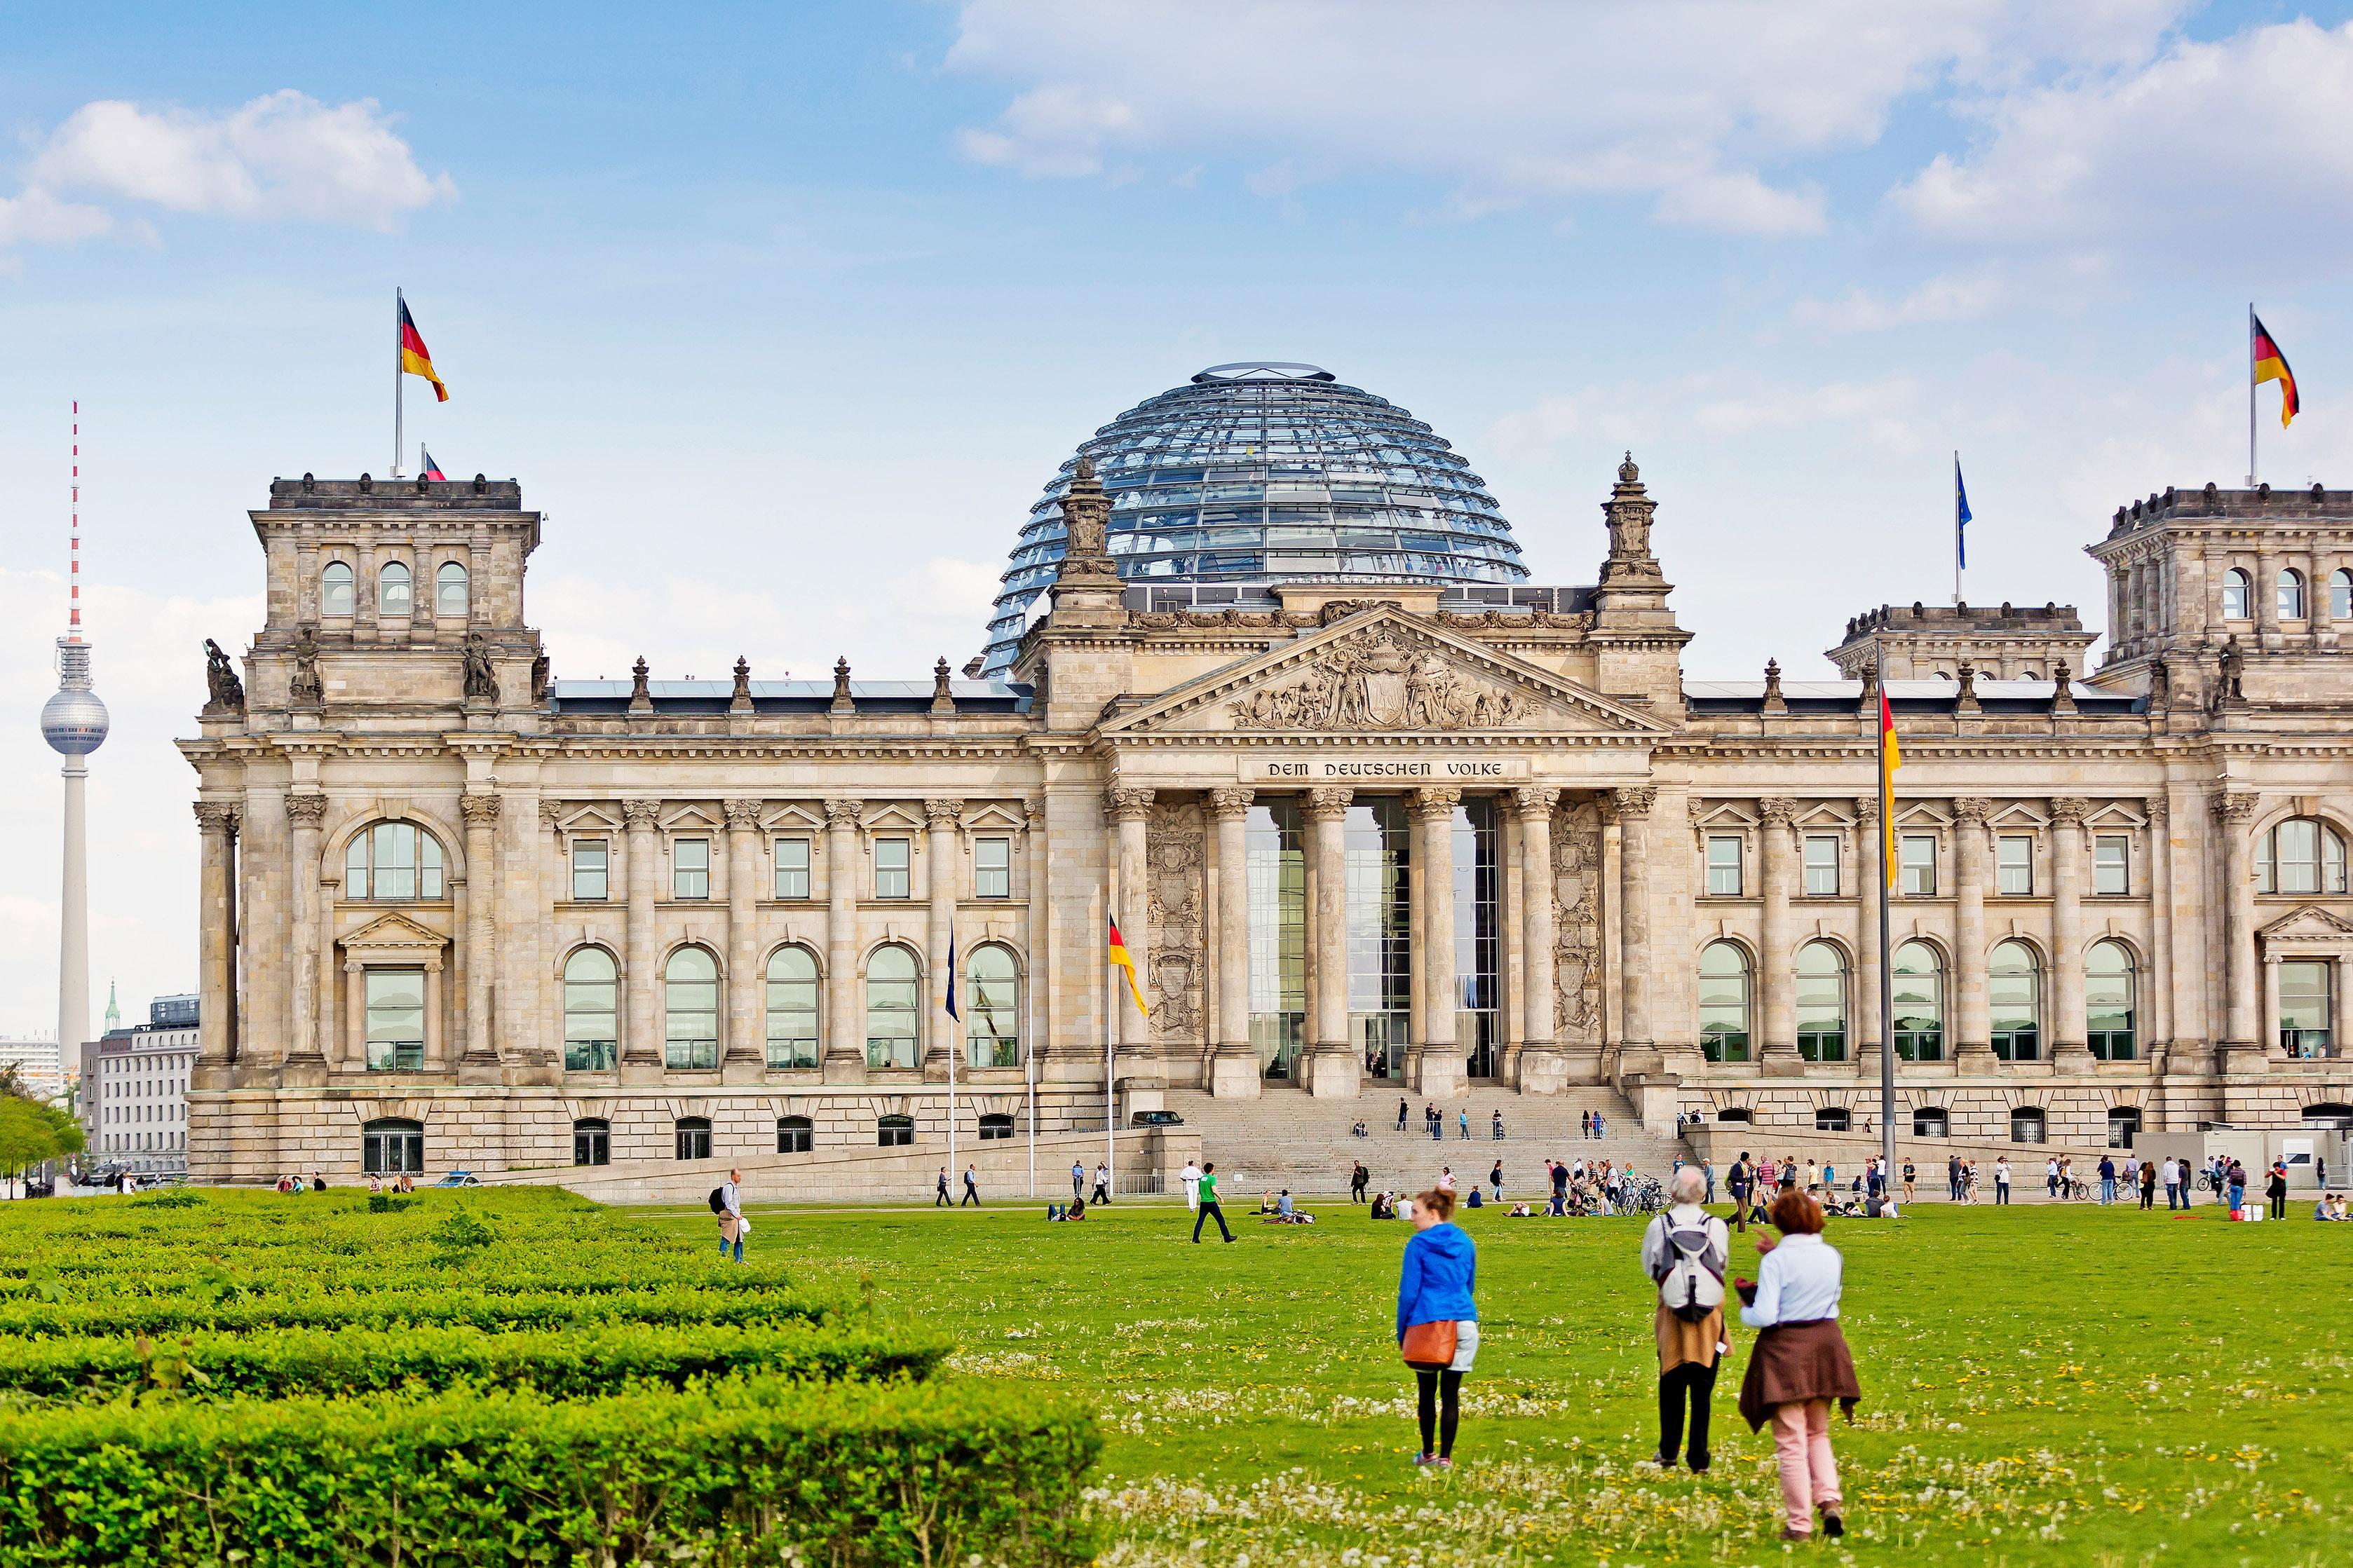 The Reichstag 